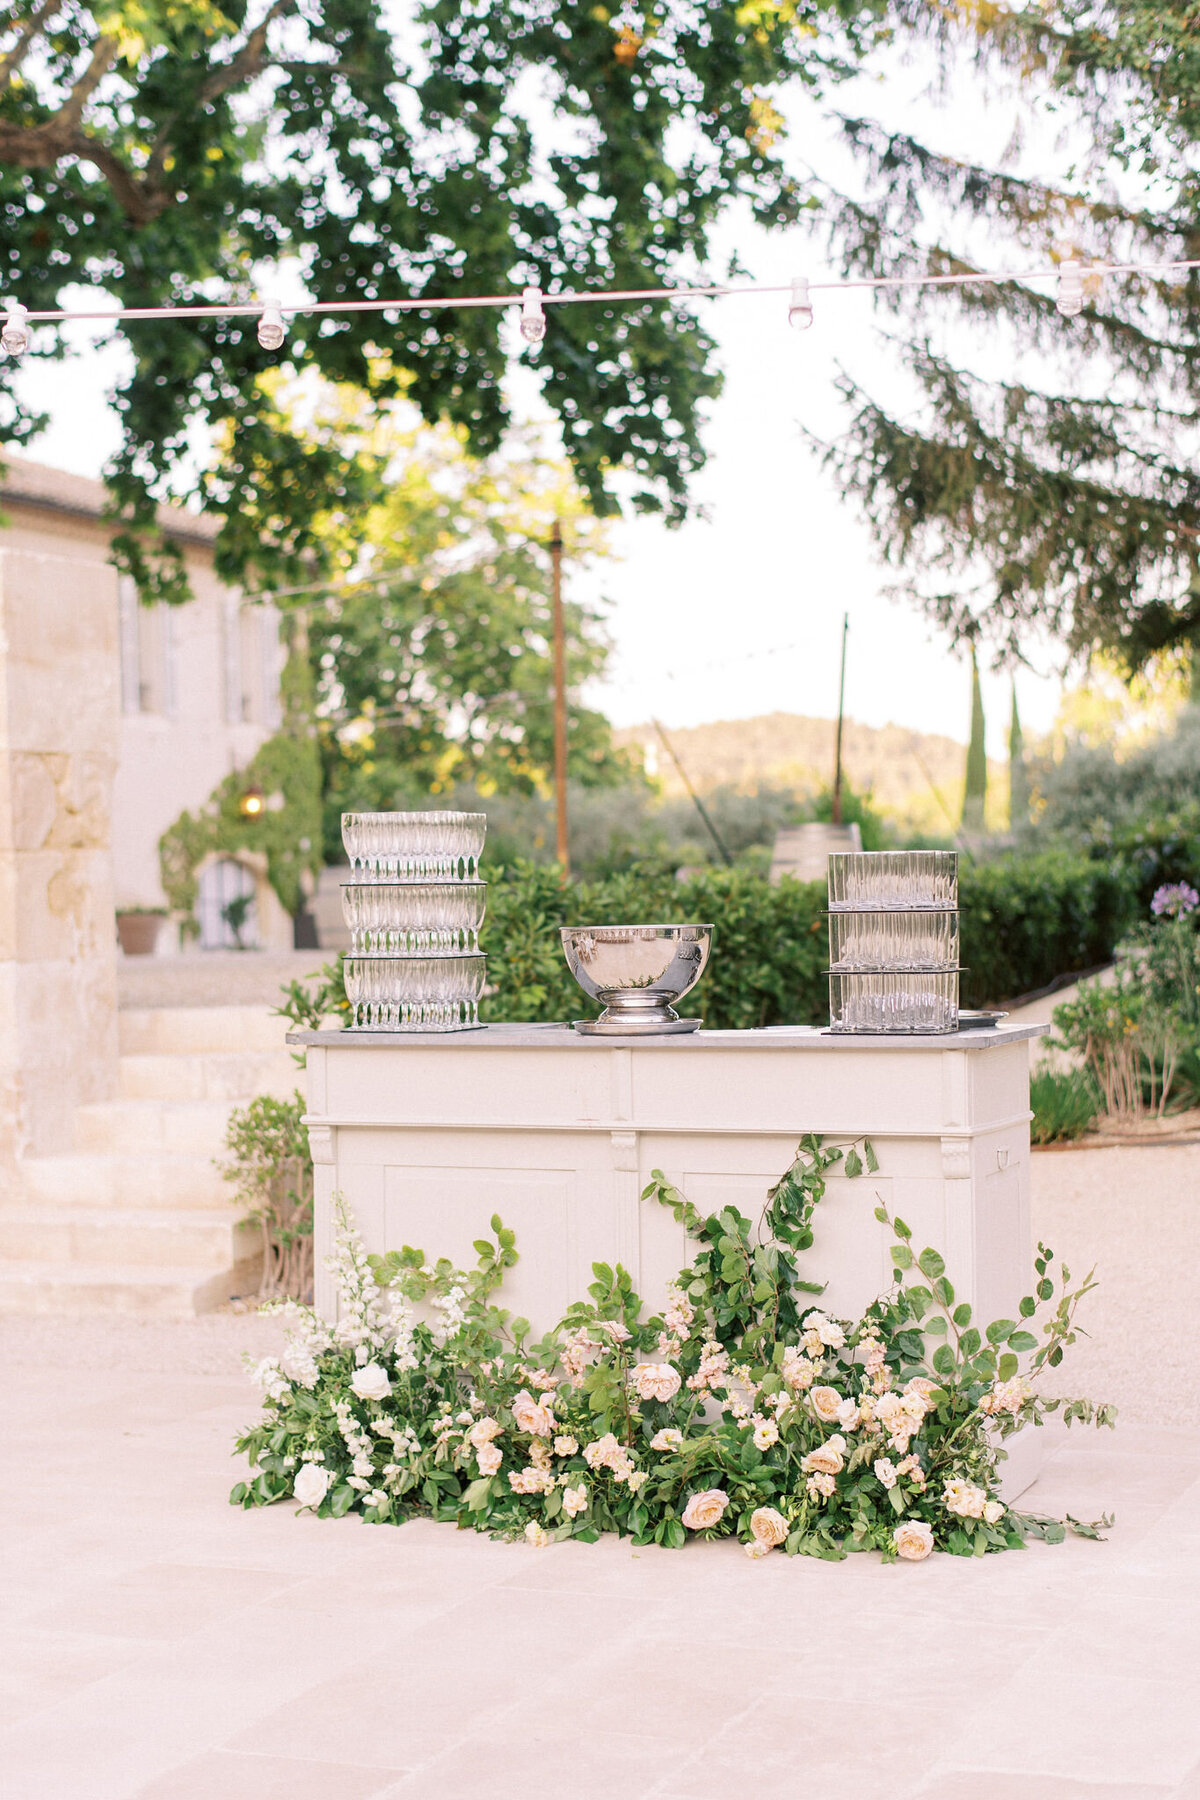 Jennifer Fox Weddings English speaking wedding planning & design agency in France crafting refined and bespoke weddings and celebrations Provence, Paris and destination MailysFortunePhotography_Jordan&Brian_663web